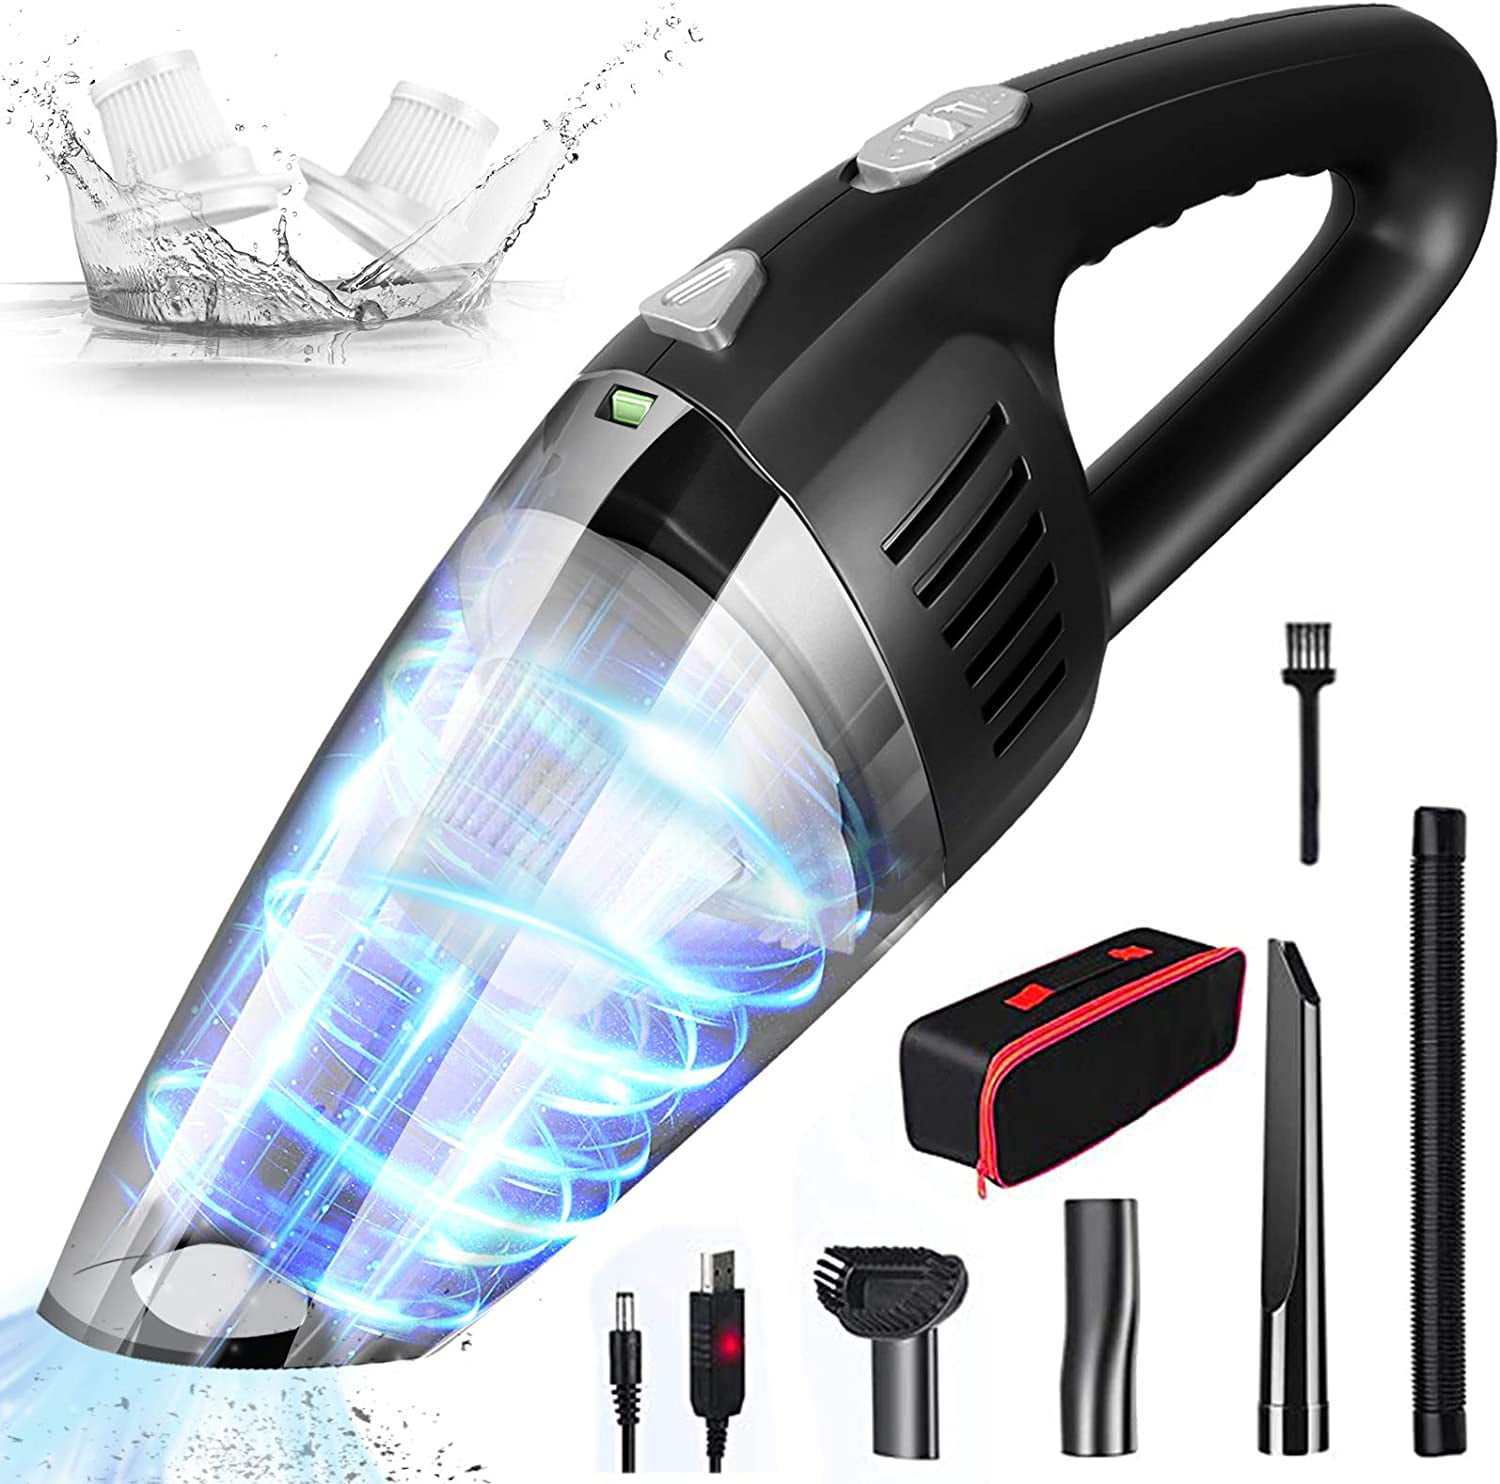 Car portable wireless dry and wet vacuum cleaner household handheld high power 